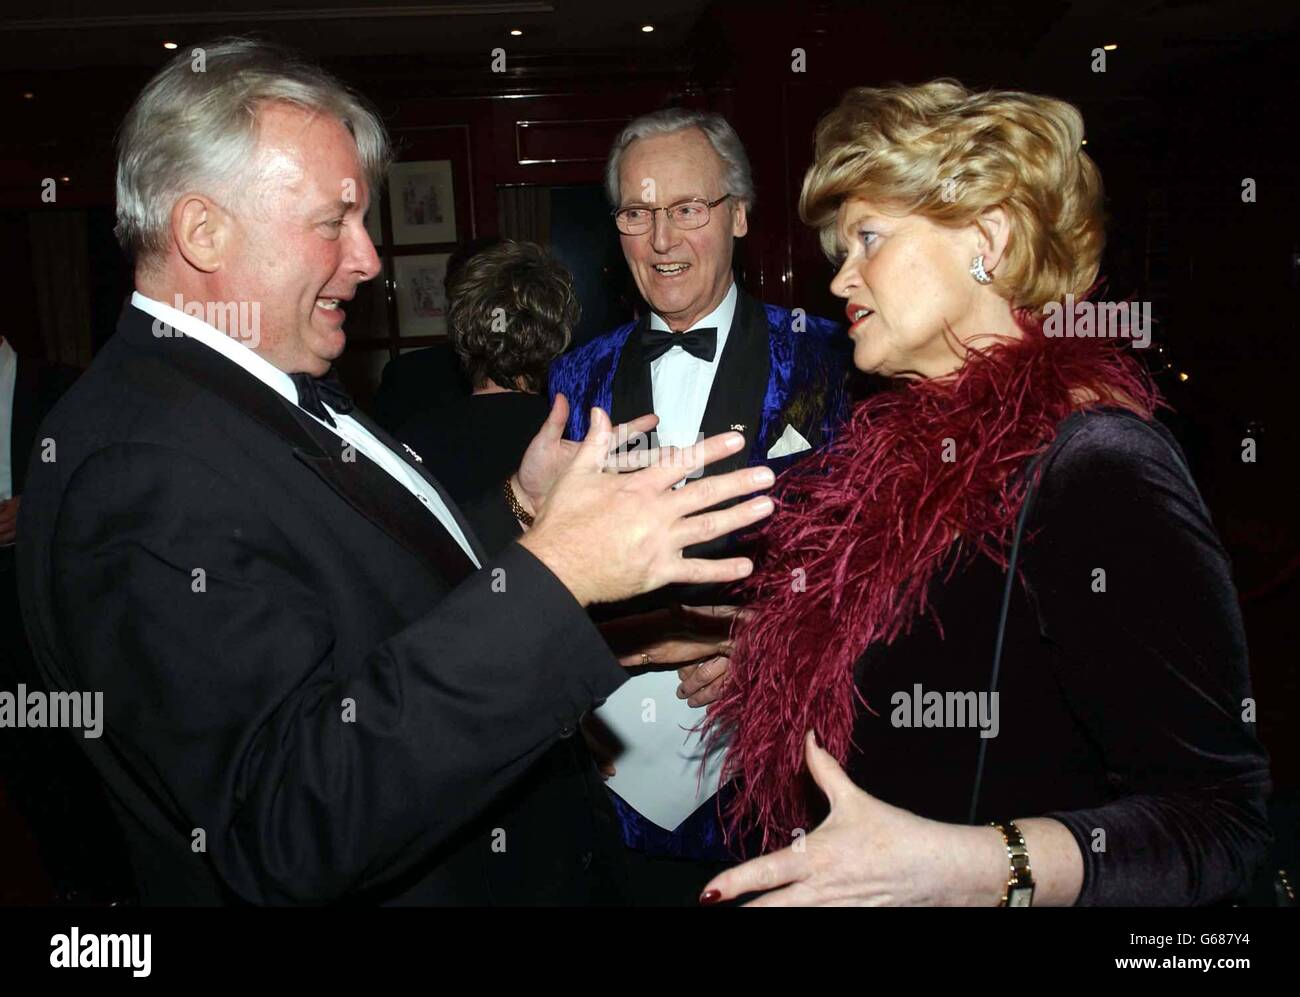 Christopher Biggins talks to Nicholas Parsons and his wife during the Variety Club 51st Annual Dinner & Ball at the Grovesnor House Hotel, central London. Stock Photo